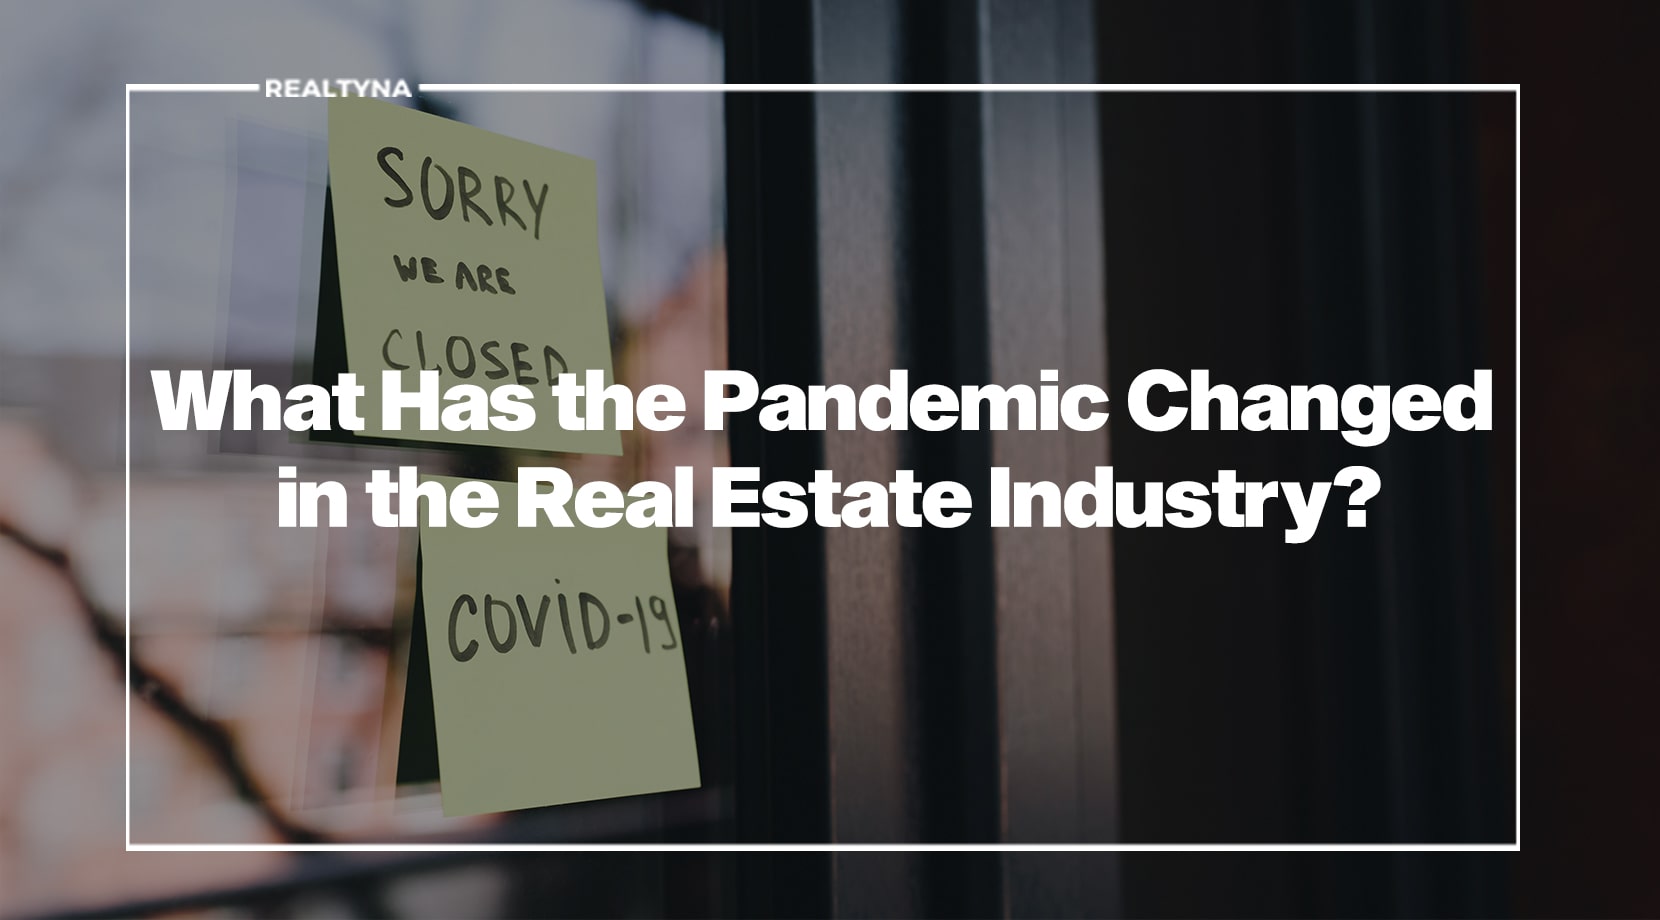 What has the pandemic changed in the real estate industry?